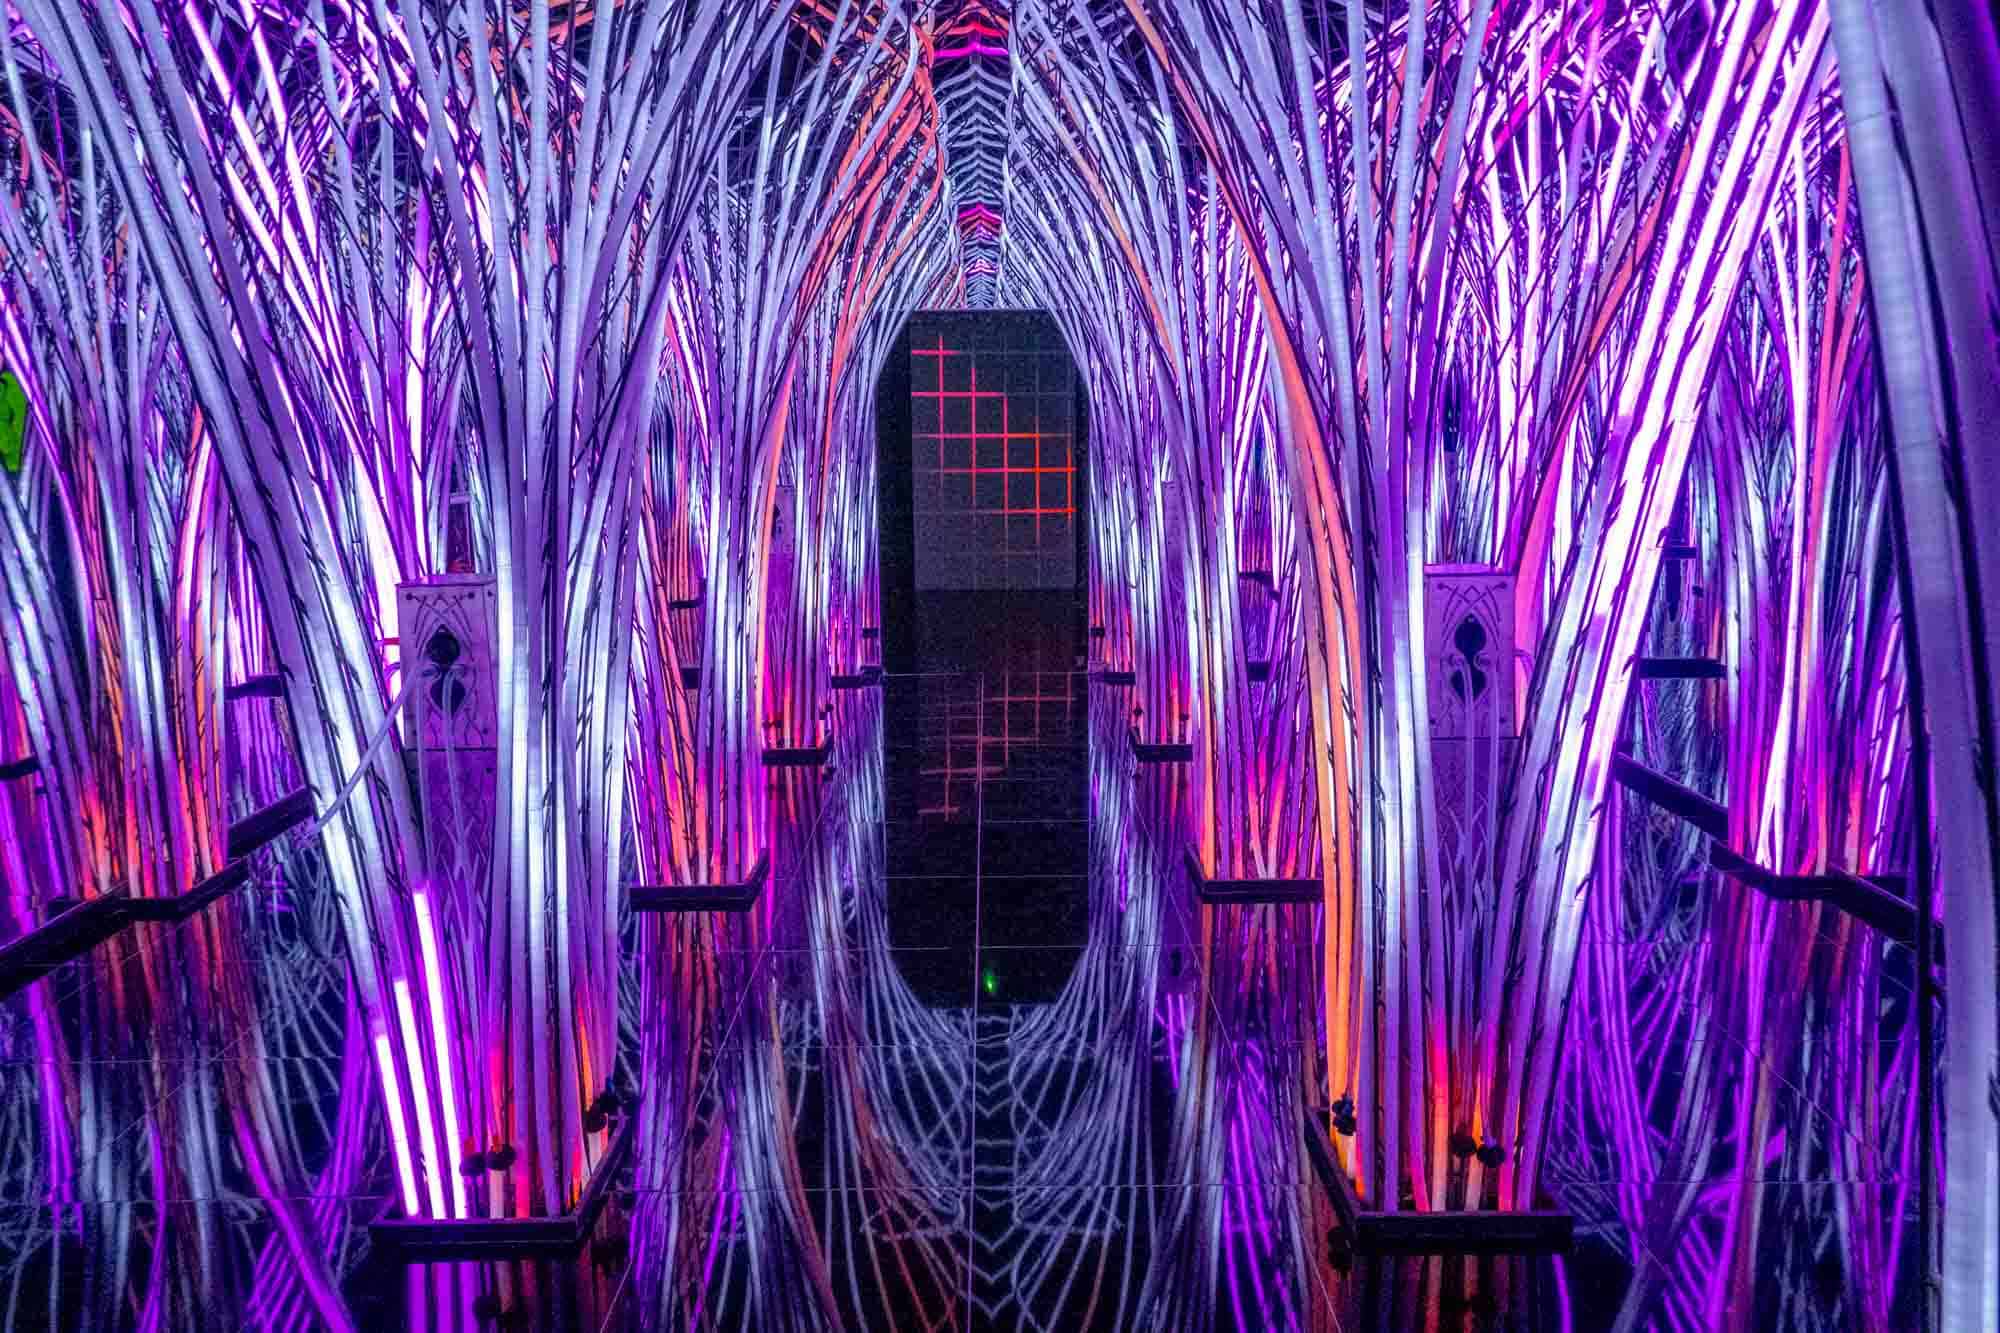 Trees made of colorful LED lights